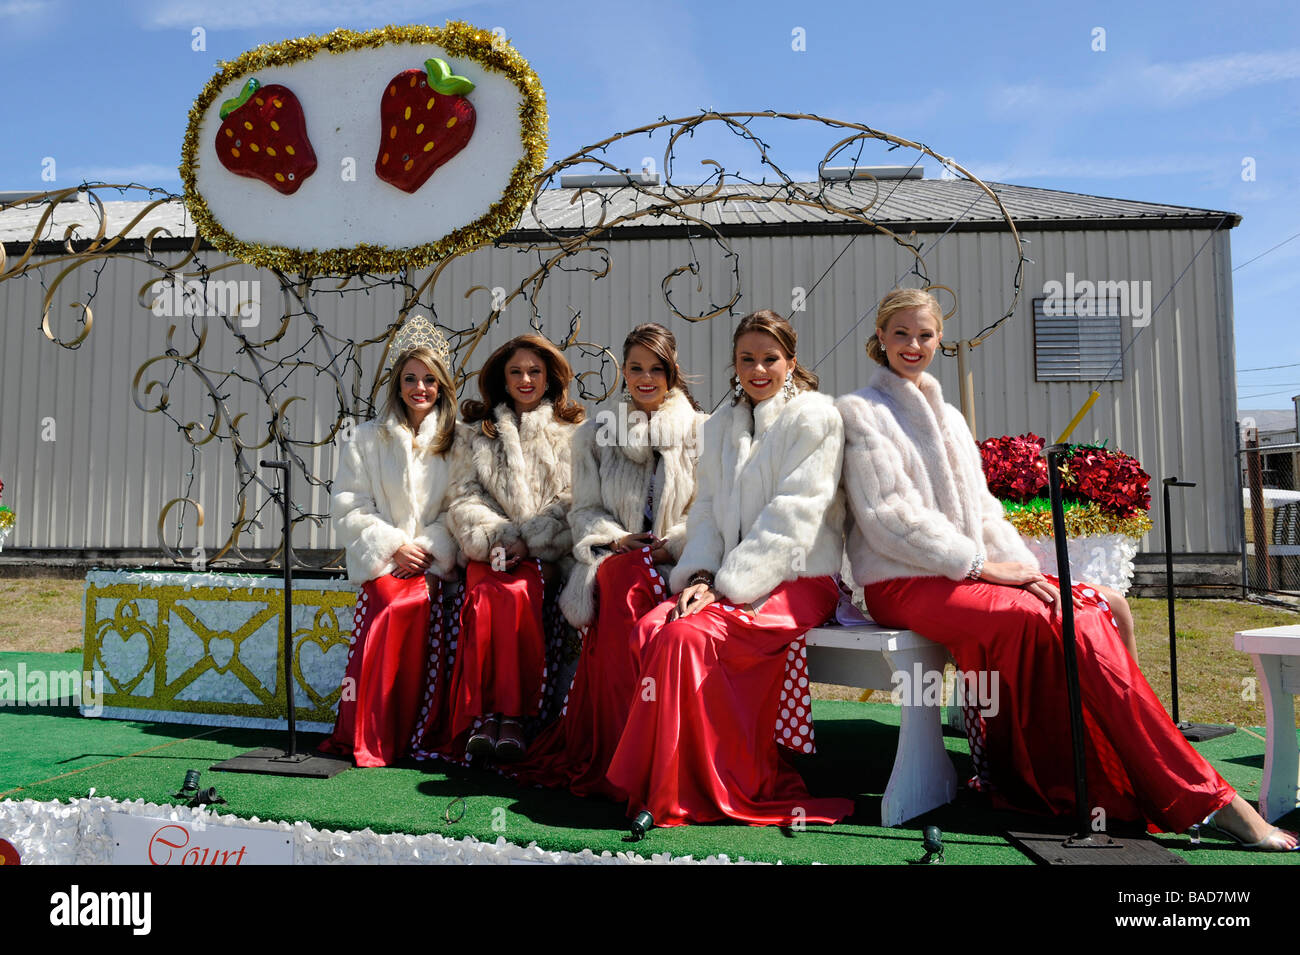 Queen and her court on float at Strawberry Festival Parade Plant City Florida Stock Photo